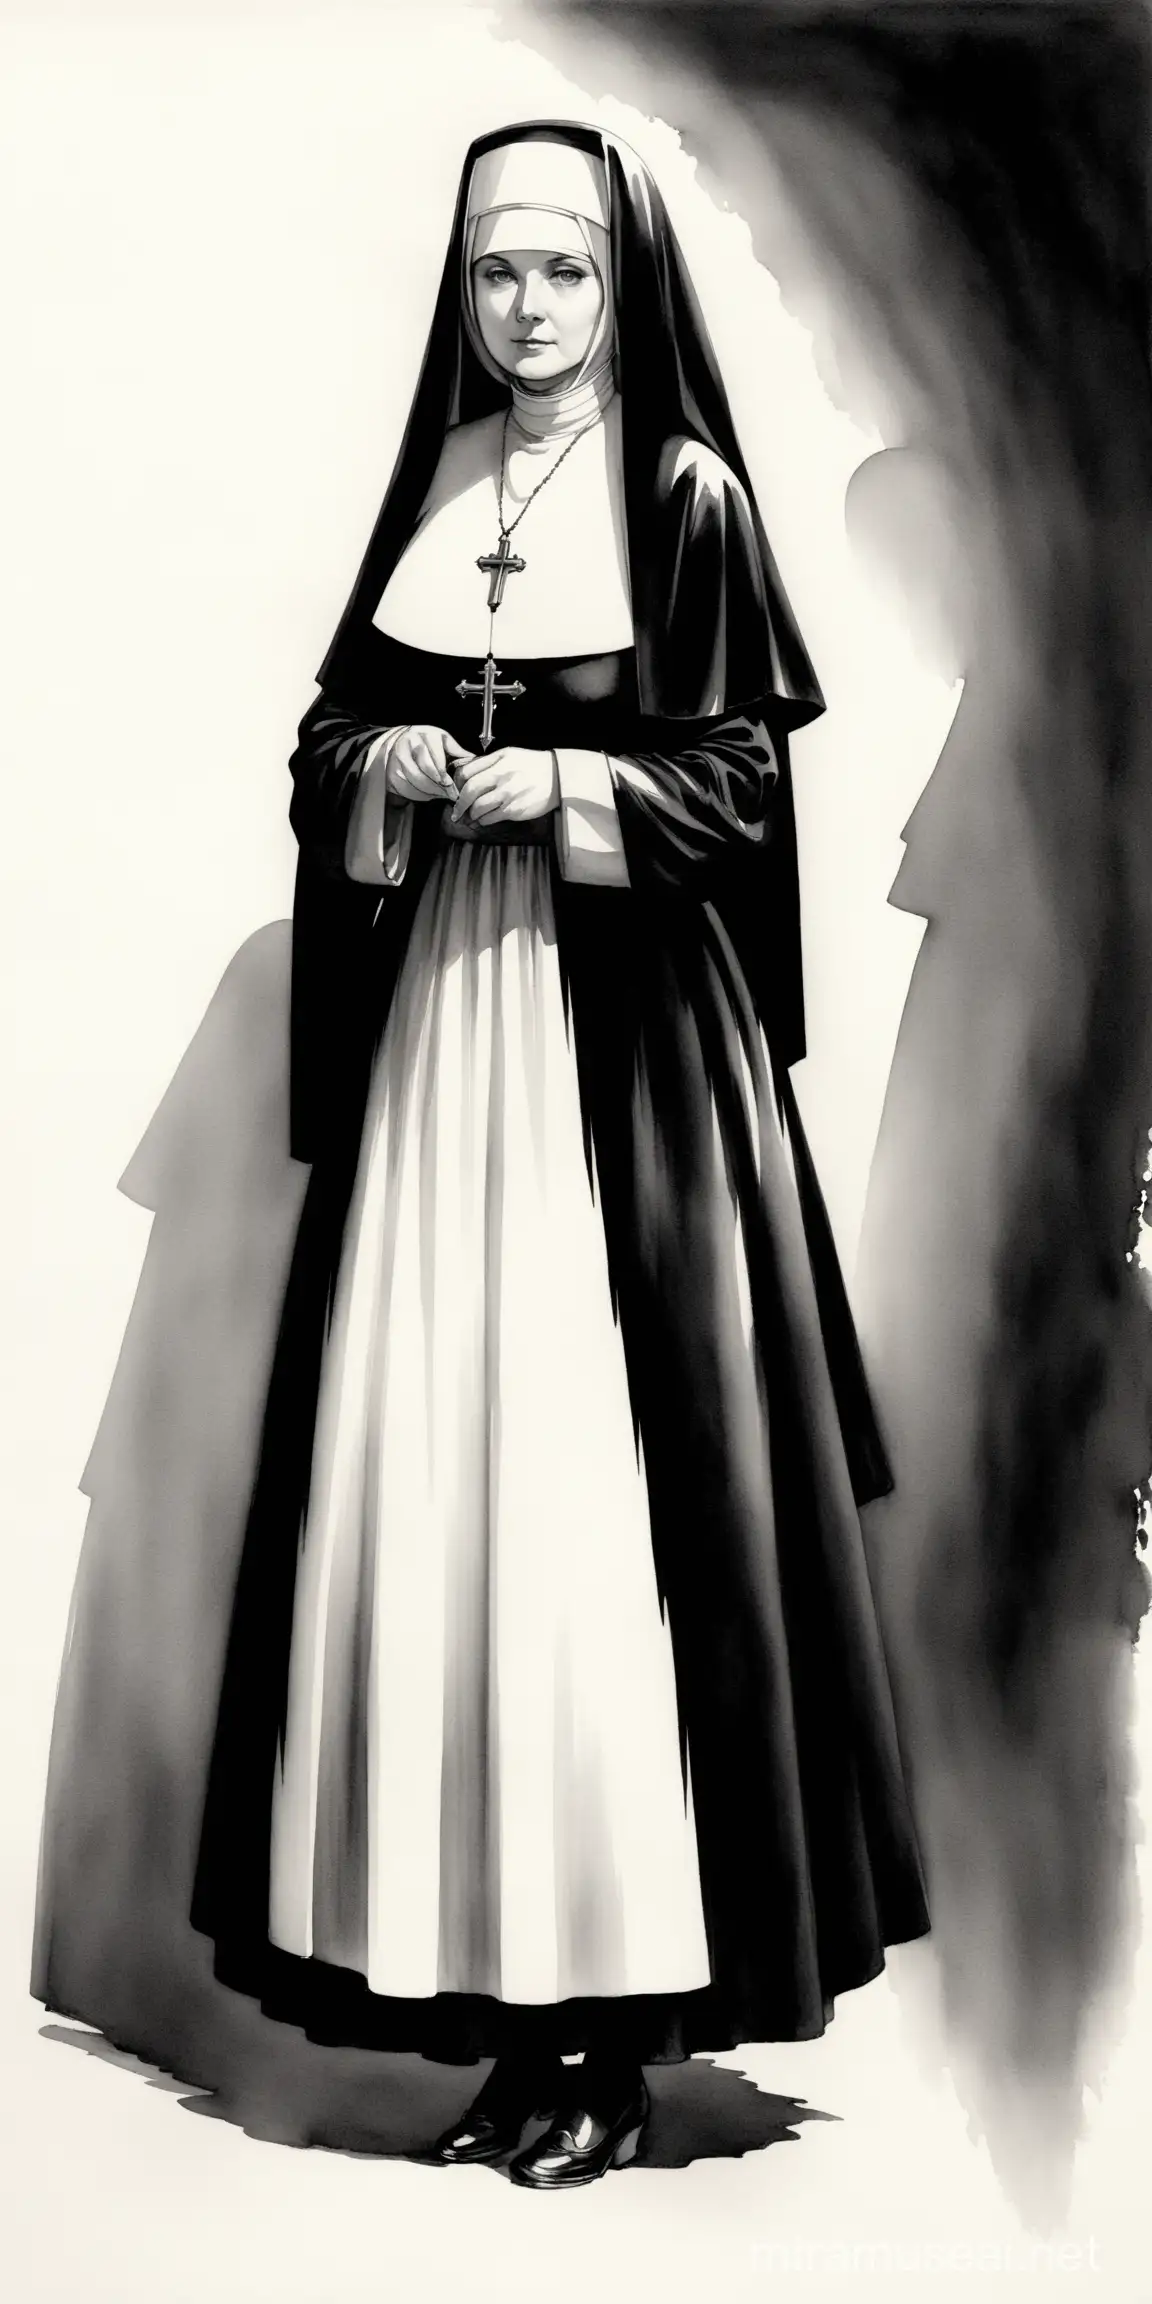 Victorian Era Nun Portrait Ink Painting with Dramatic Shadows